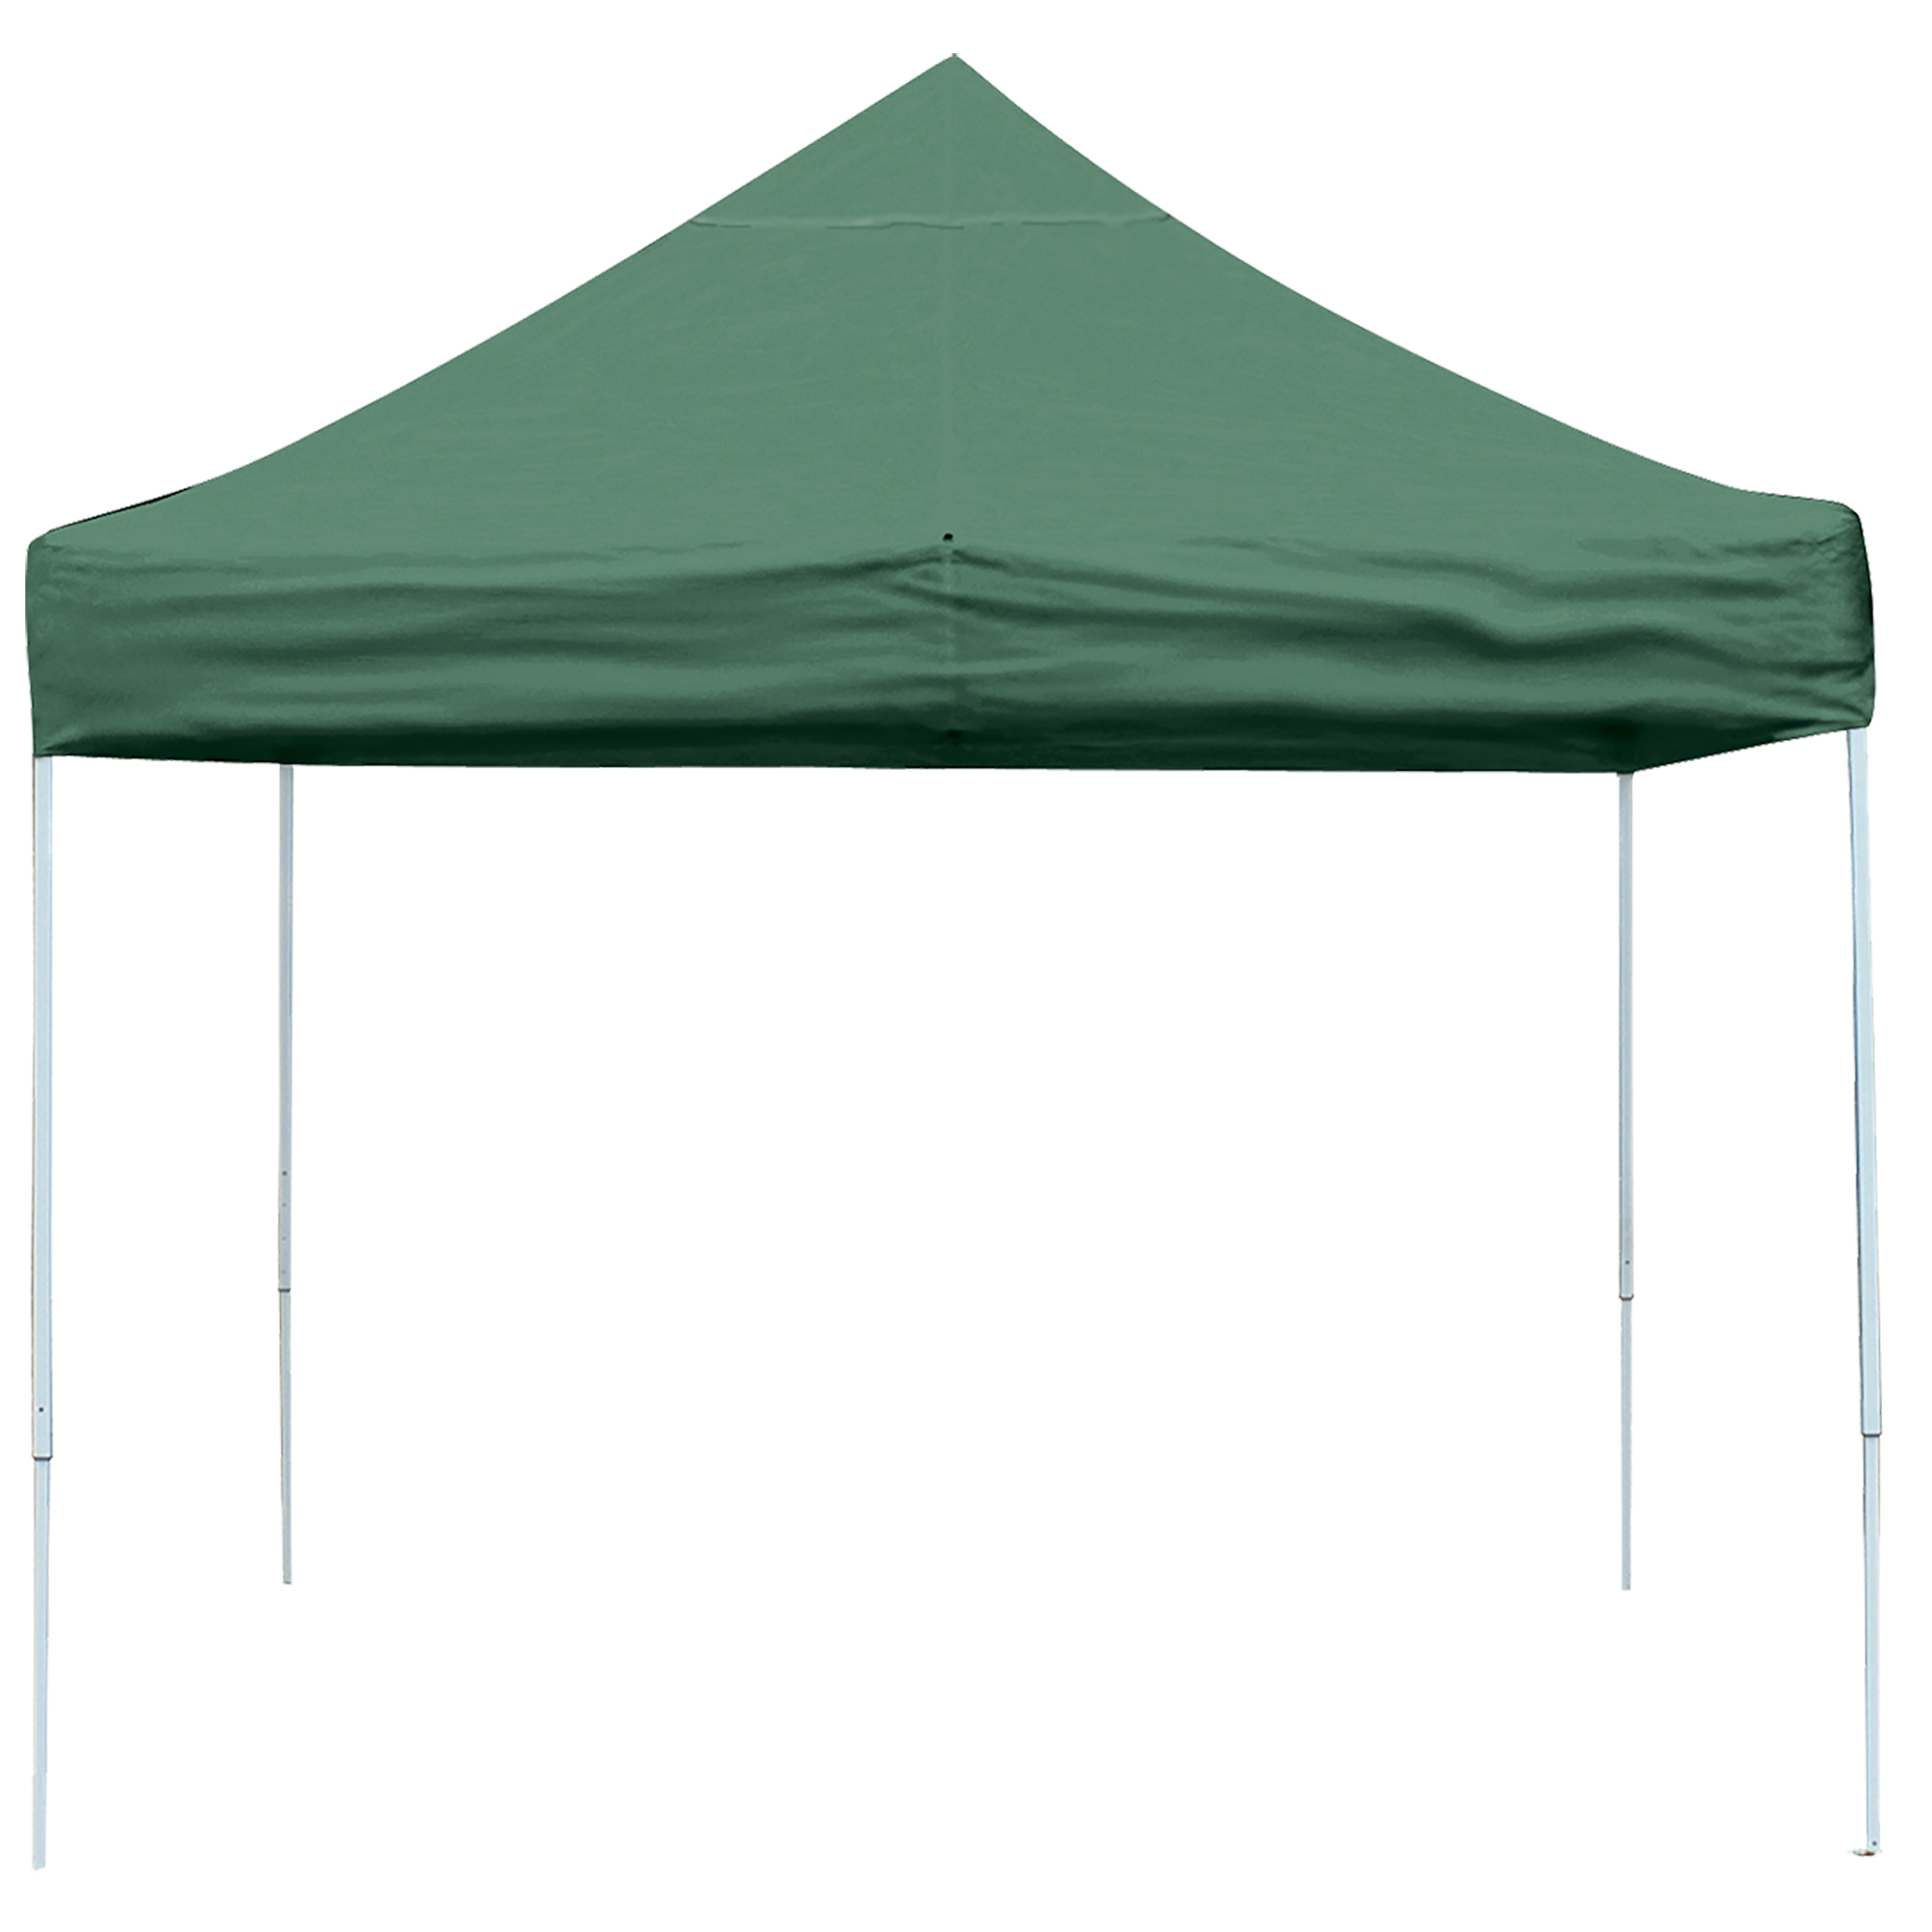 10 Ft. X 10 Ft. Pro Pop-up Canopy Straight Leg, Green Cover